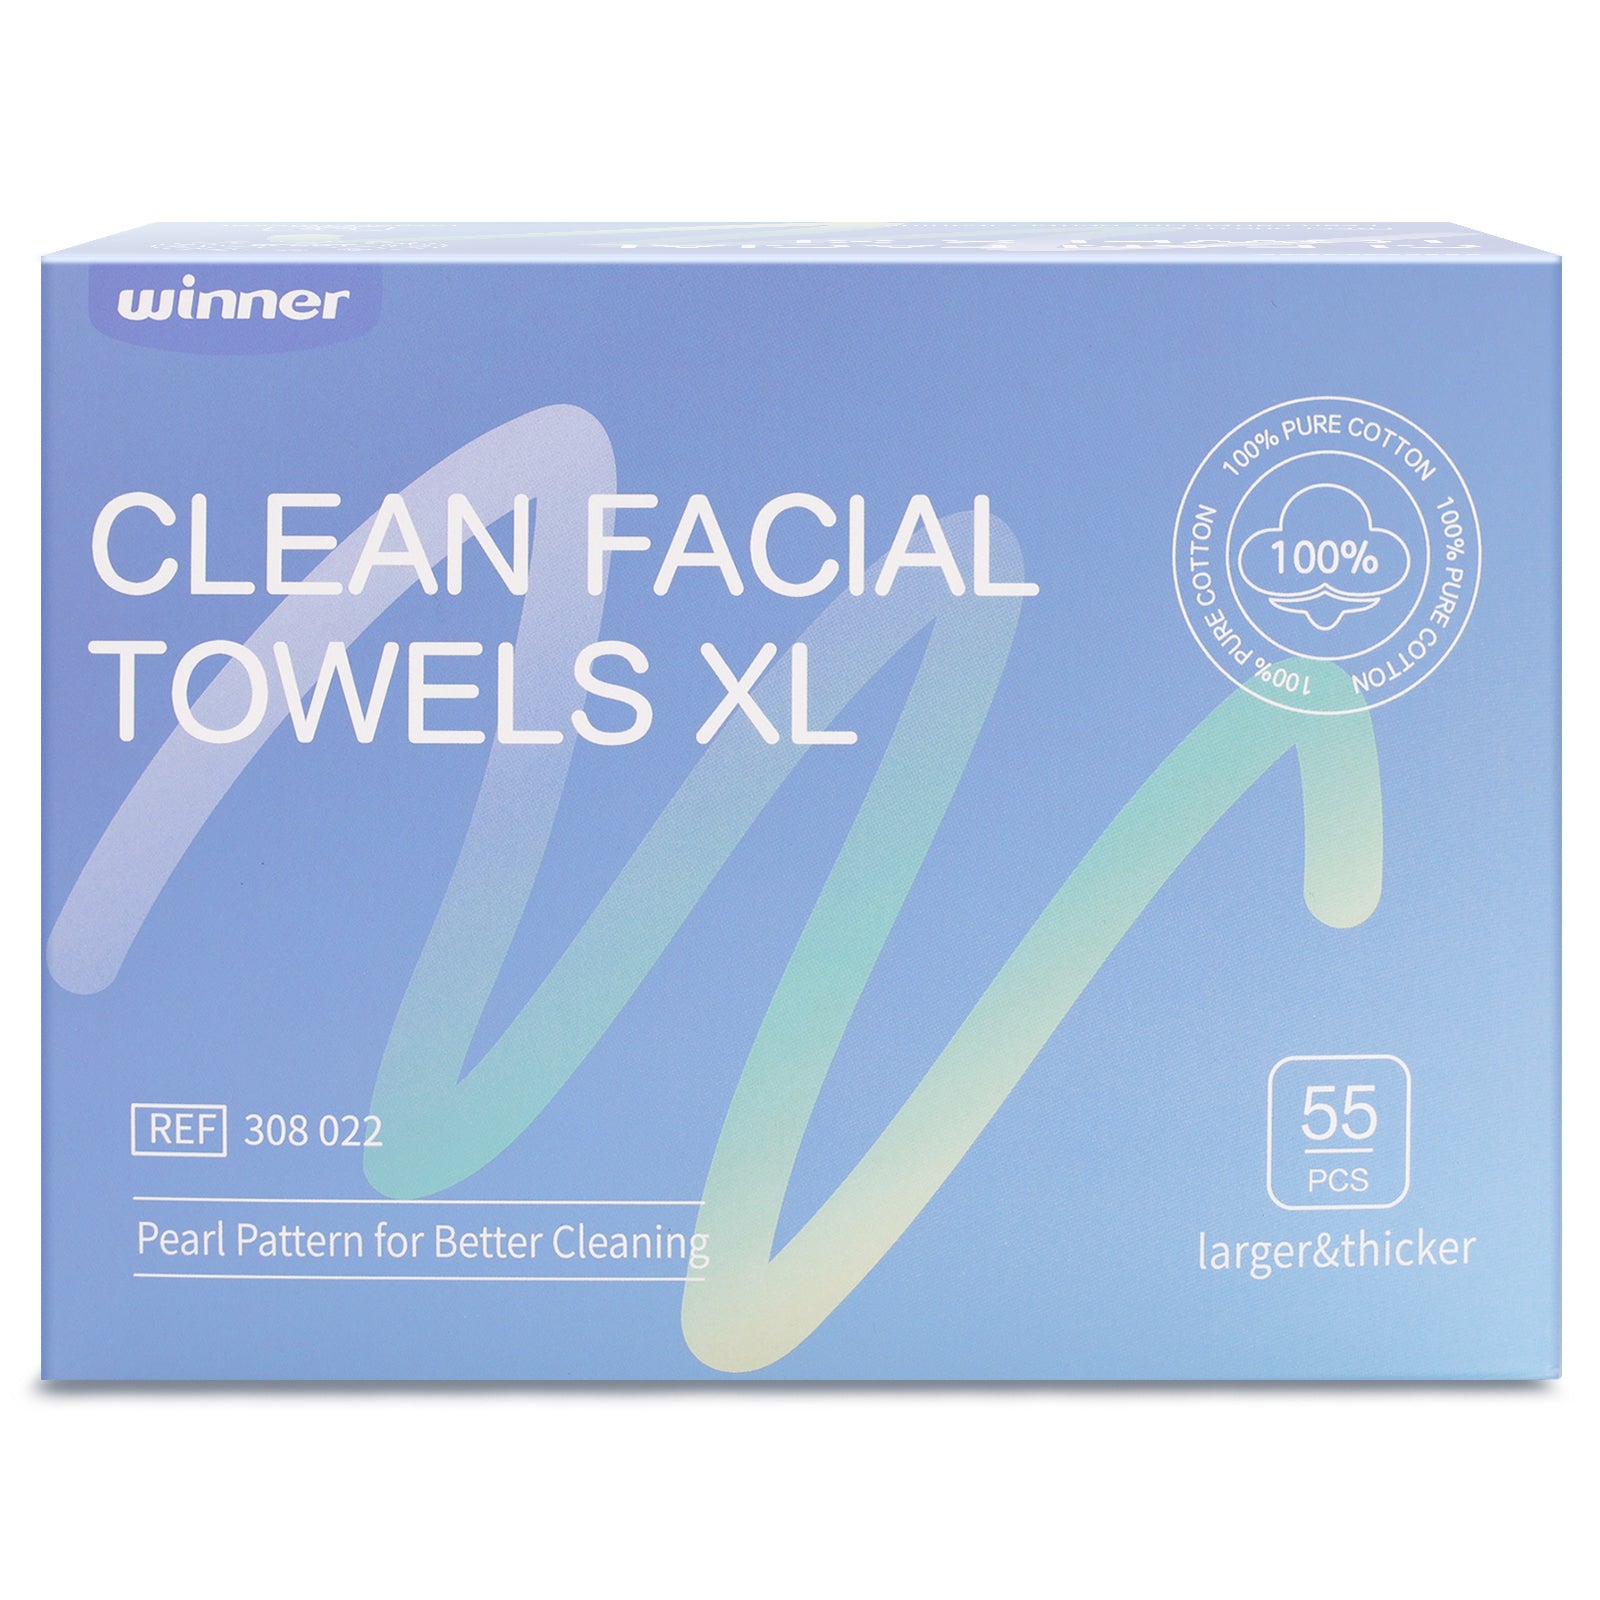 Winner Large Cotton Facial Towels Disposable Towels Unscented Facial  Cleansing Cloths